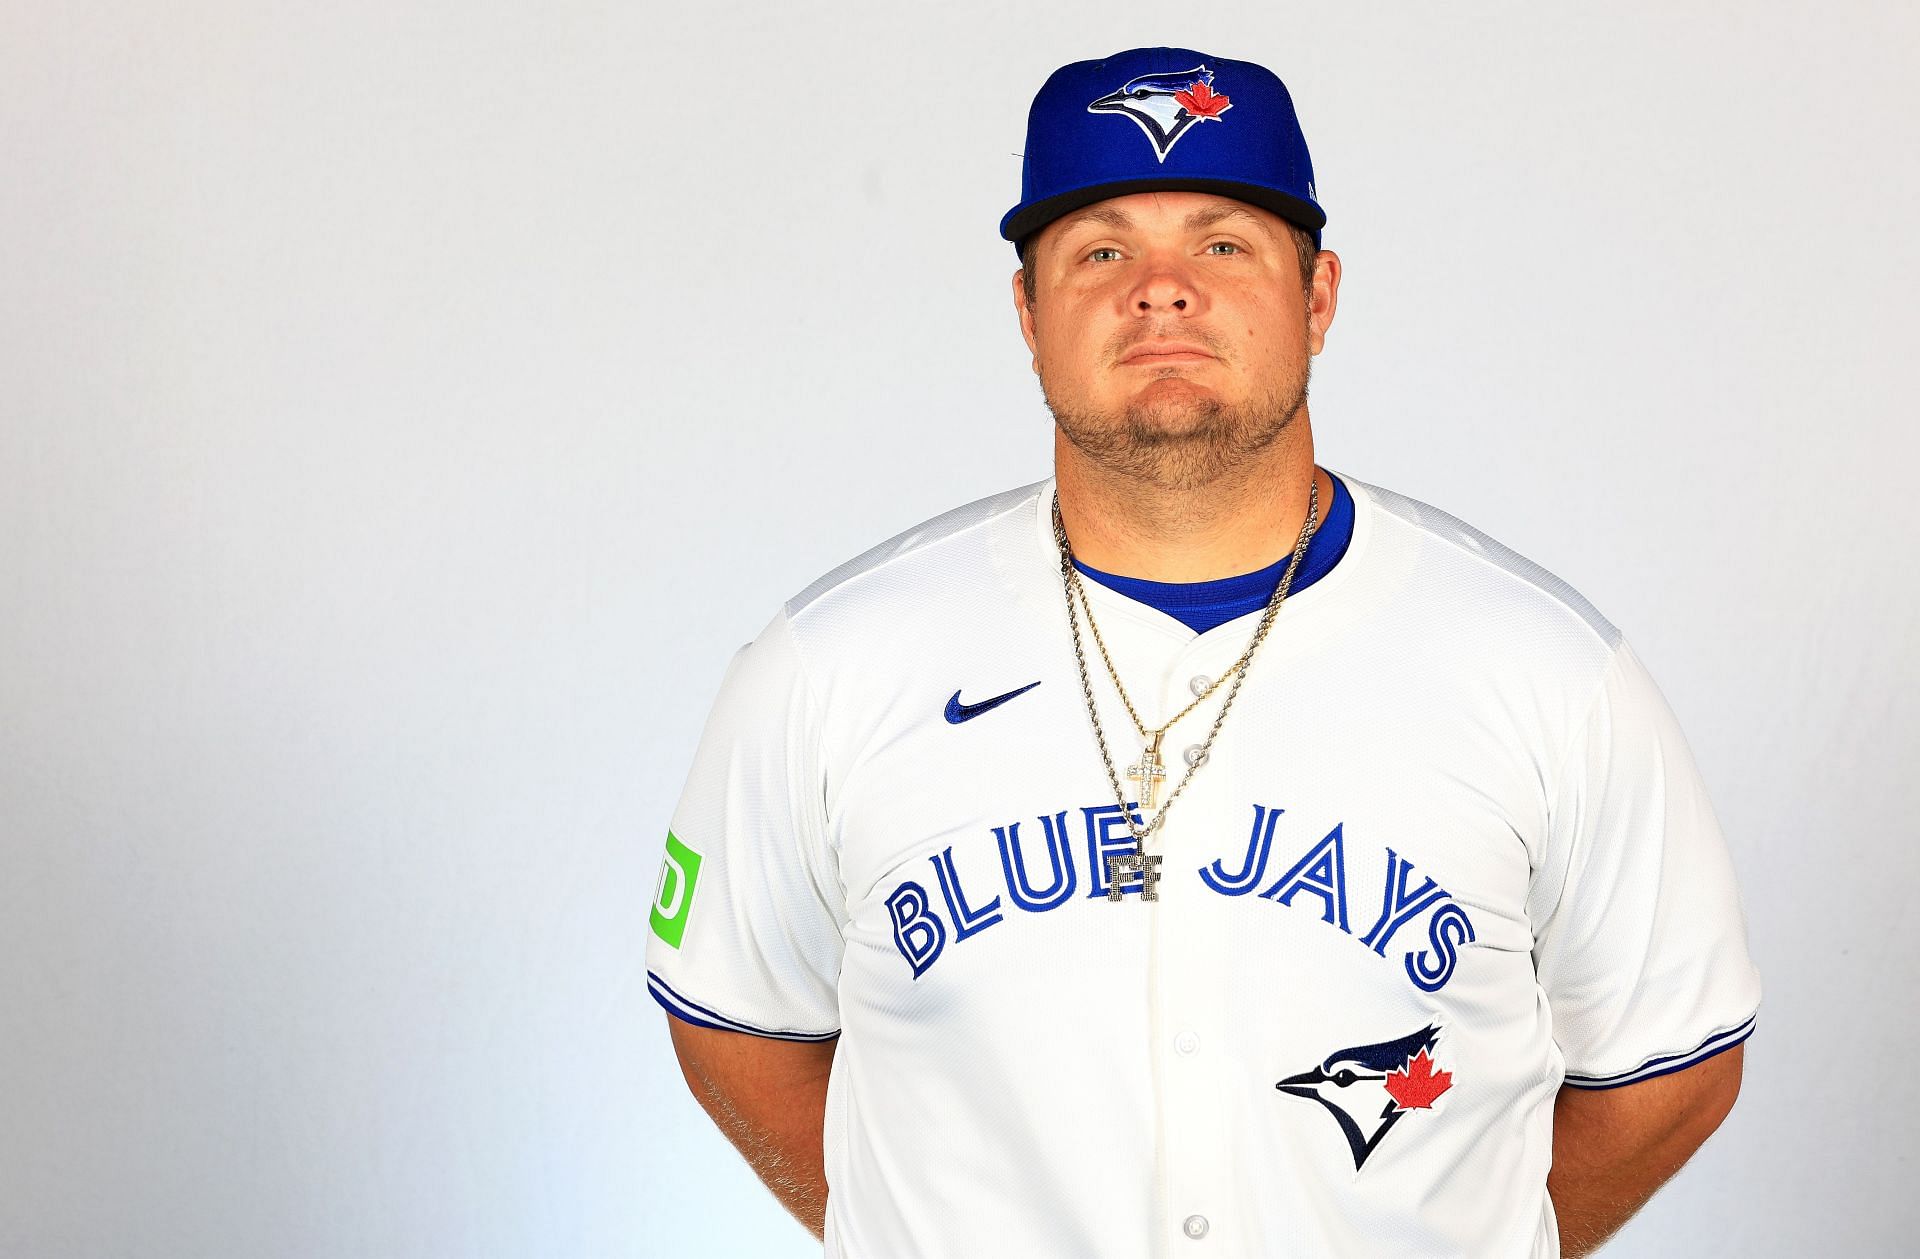 After signing a recent Minor League deal with the Blue Jays, Daniel Vogelbach showcased his skill and eagerness to contribute to the team&rsquo;s first team by hitting a two-run homer off reigning American League Cy Young, and Yankees&rsquo; ace, Gerrit Cole.